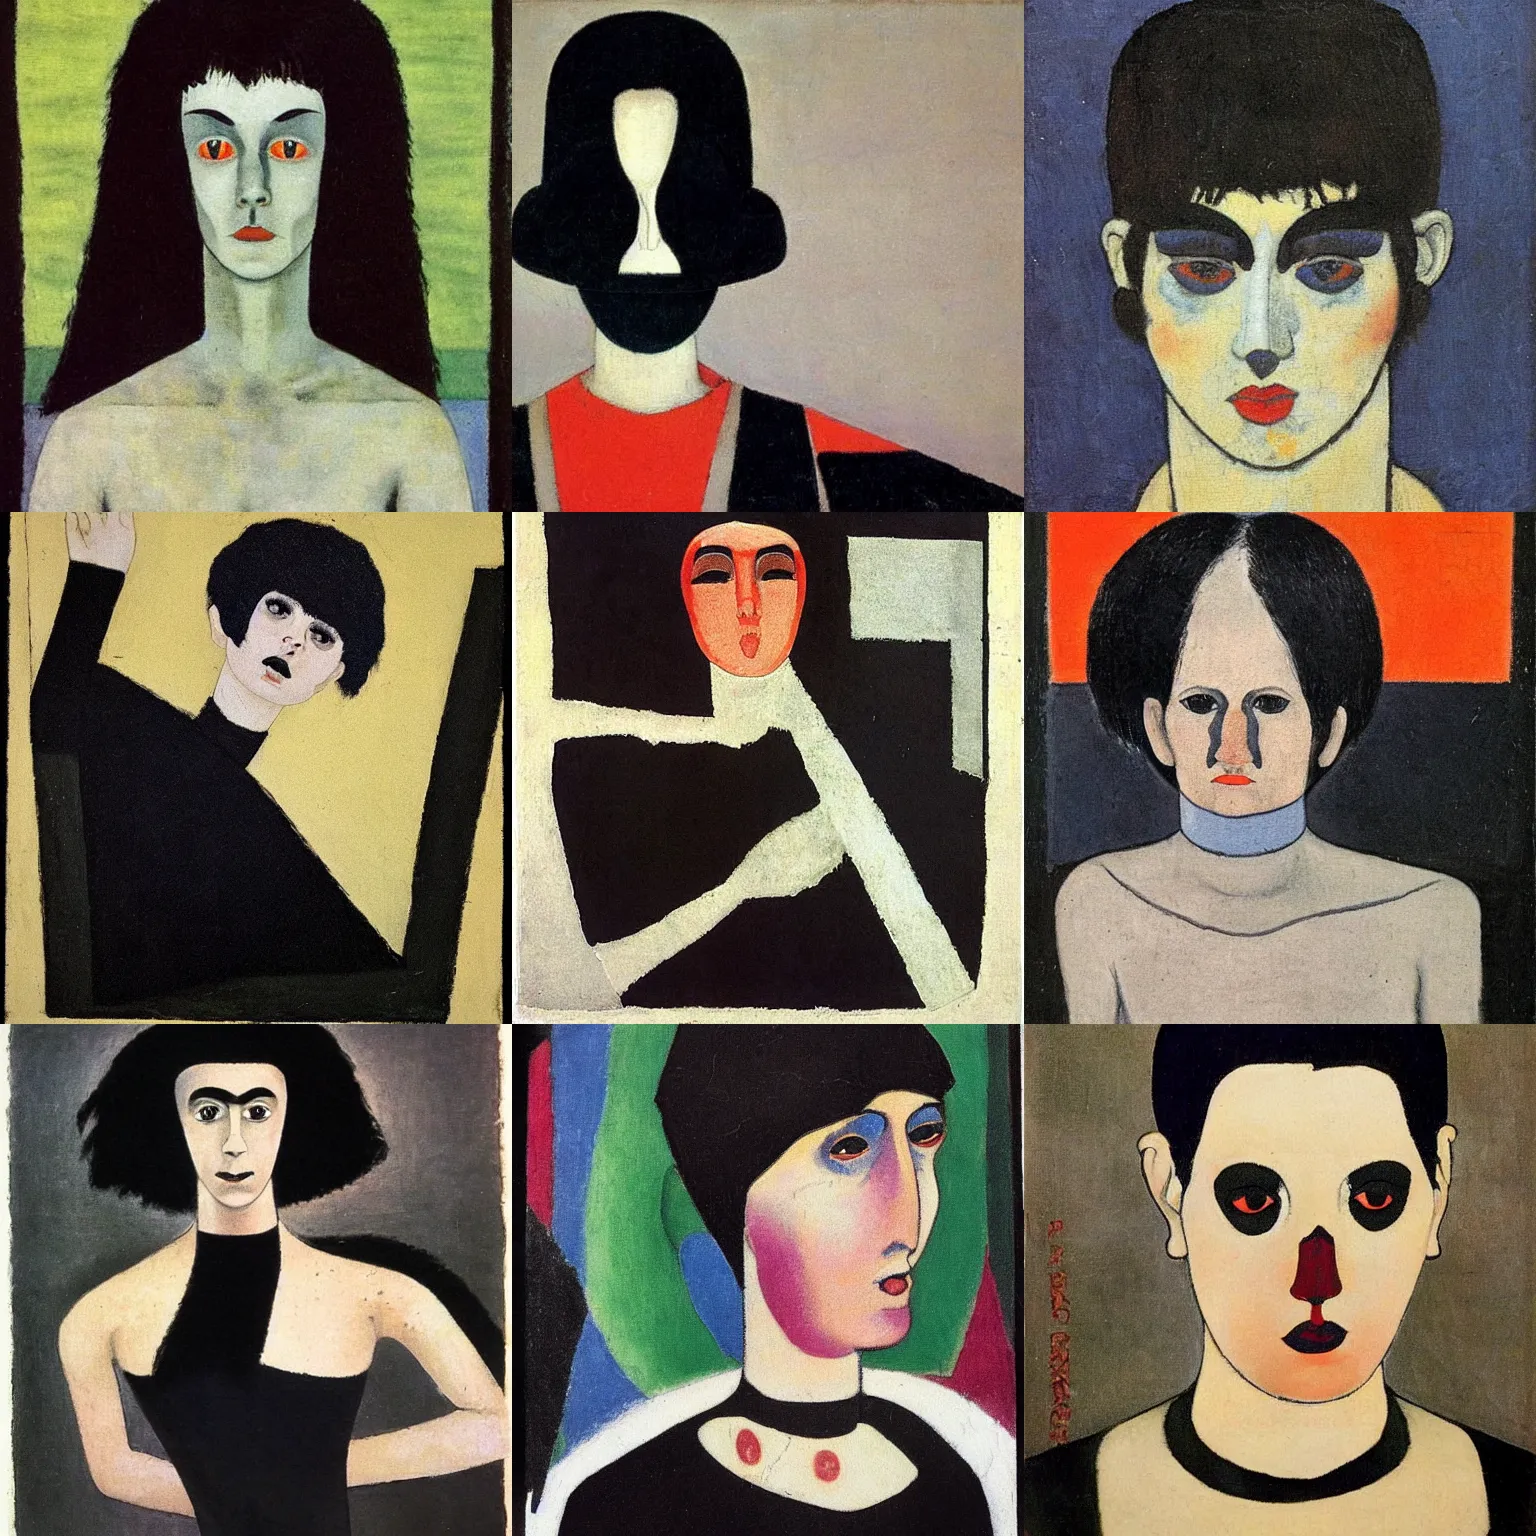 Prompt: A goth painted by Kazimir Malevich. Her hair is dark brown and cut into a short, messy pixie cut. She has a slightly rounded face, with a pointed chin, large entirely-black eyes, and a small nose. She is wearing a black tank top, a black leather jacket, a black knee-length skirt, a black choker, and black leather boots.